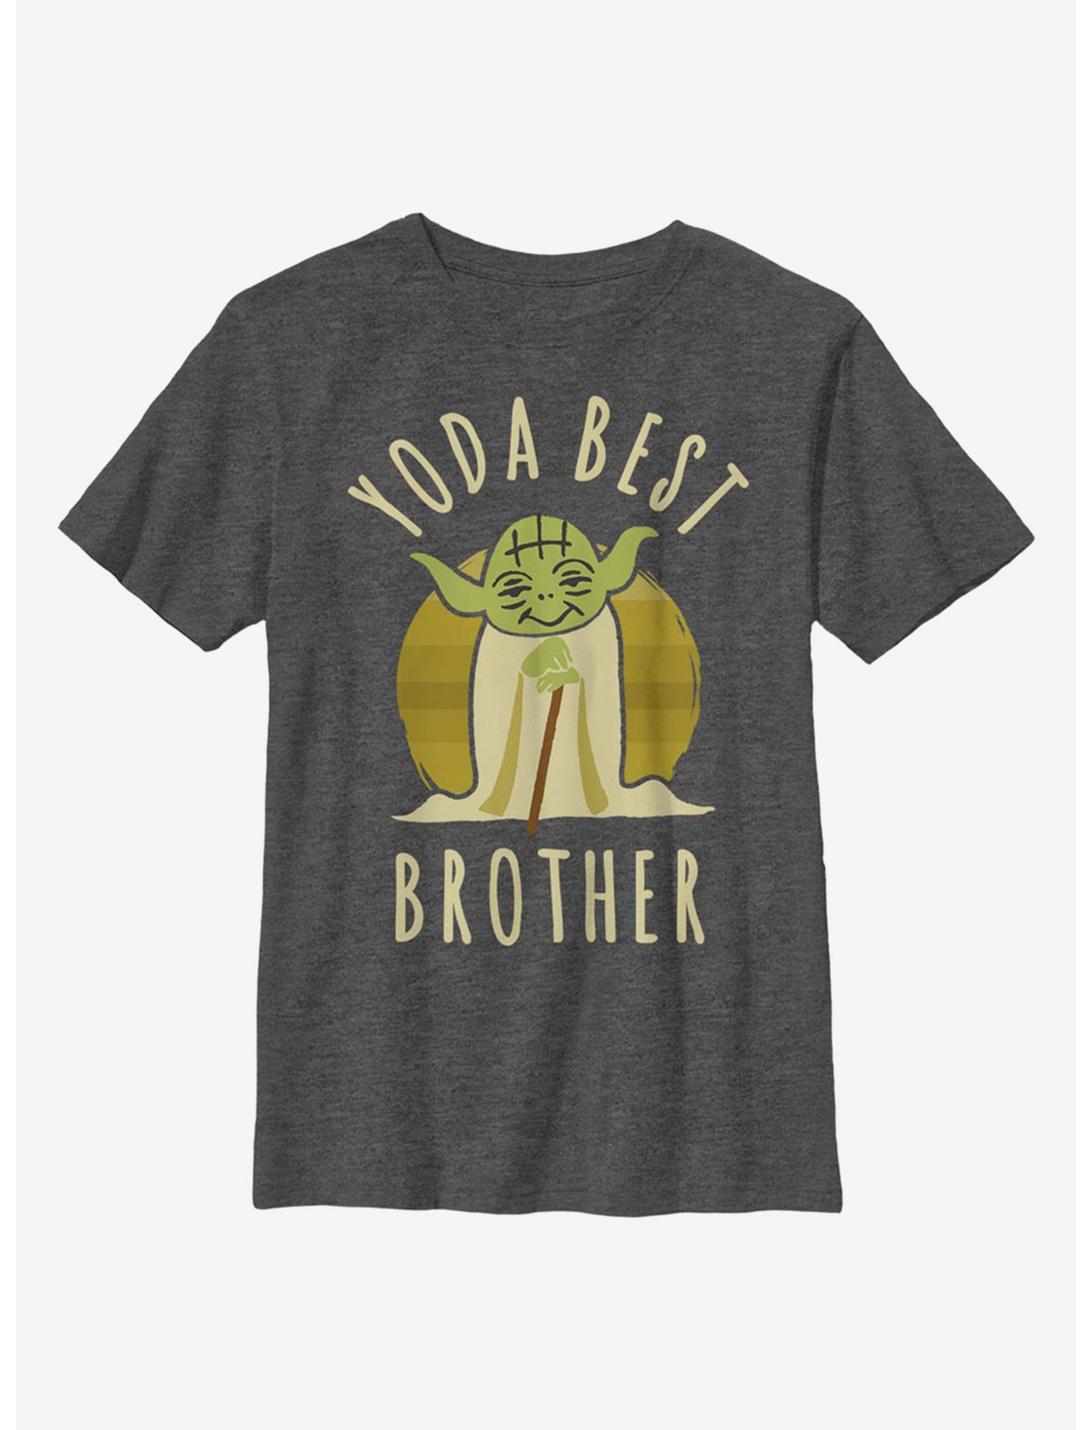 Star Wars Best Brother Yoda Says Youth T-Shirt, CHAR HTR, hi-res